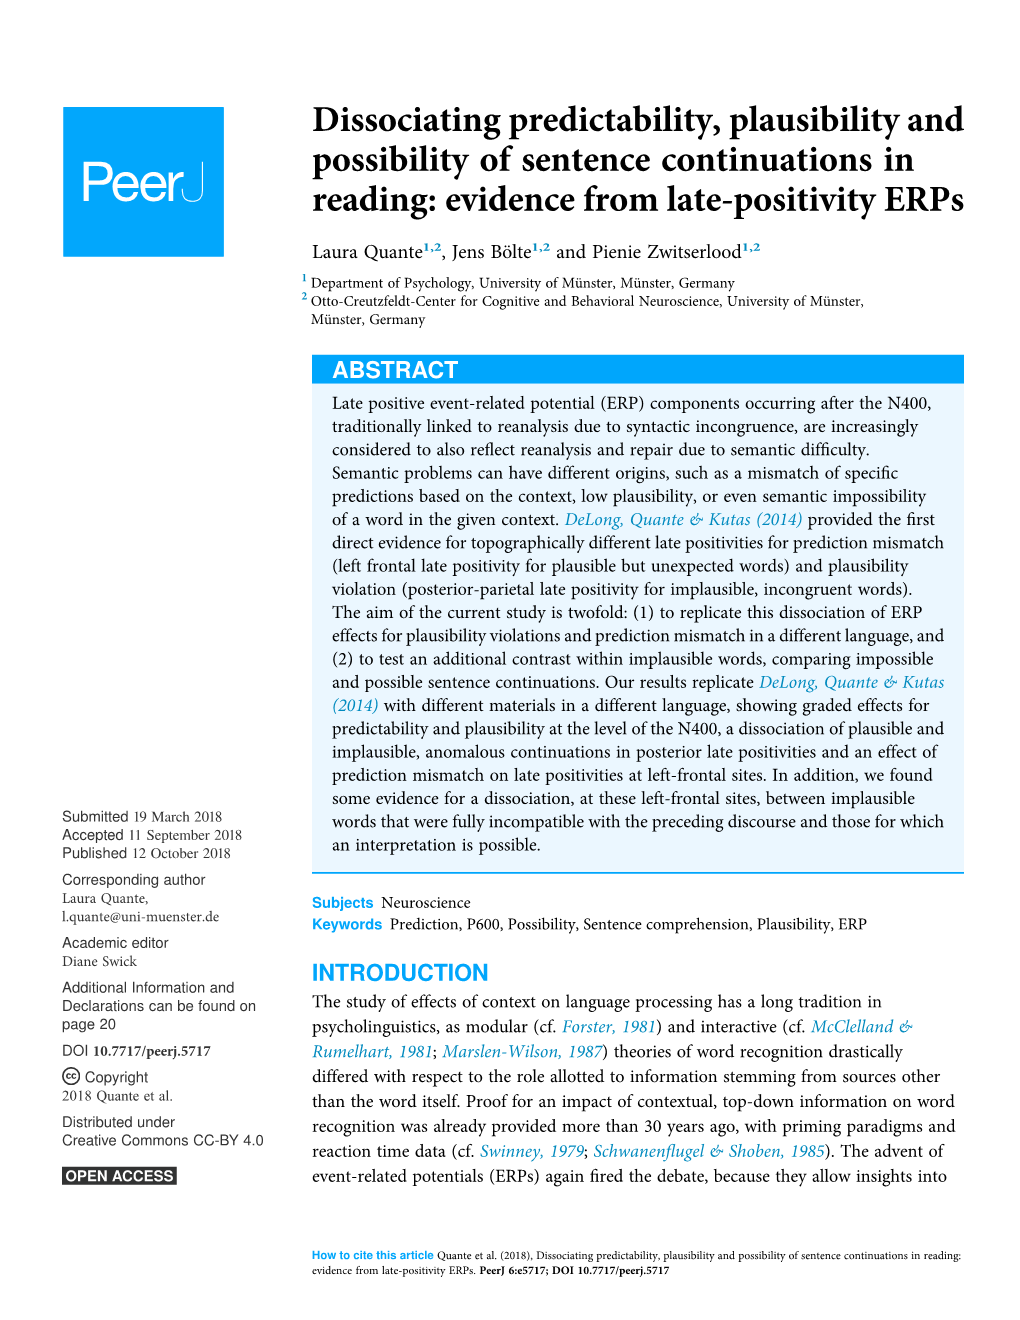 Dissociating Predictability, Plausibility and Possibility of Sentence Continuations in Reading: Evidence from Late-Positivity Erps